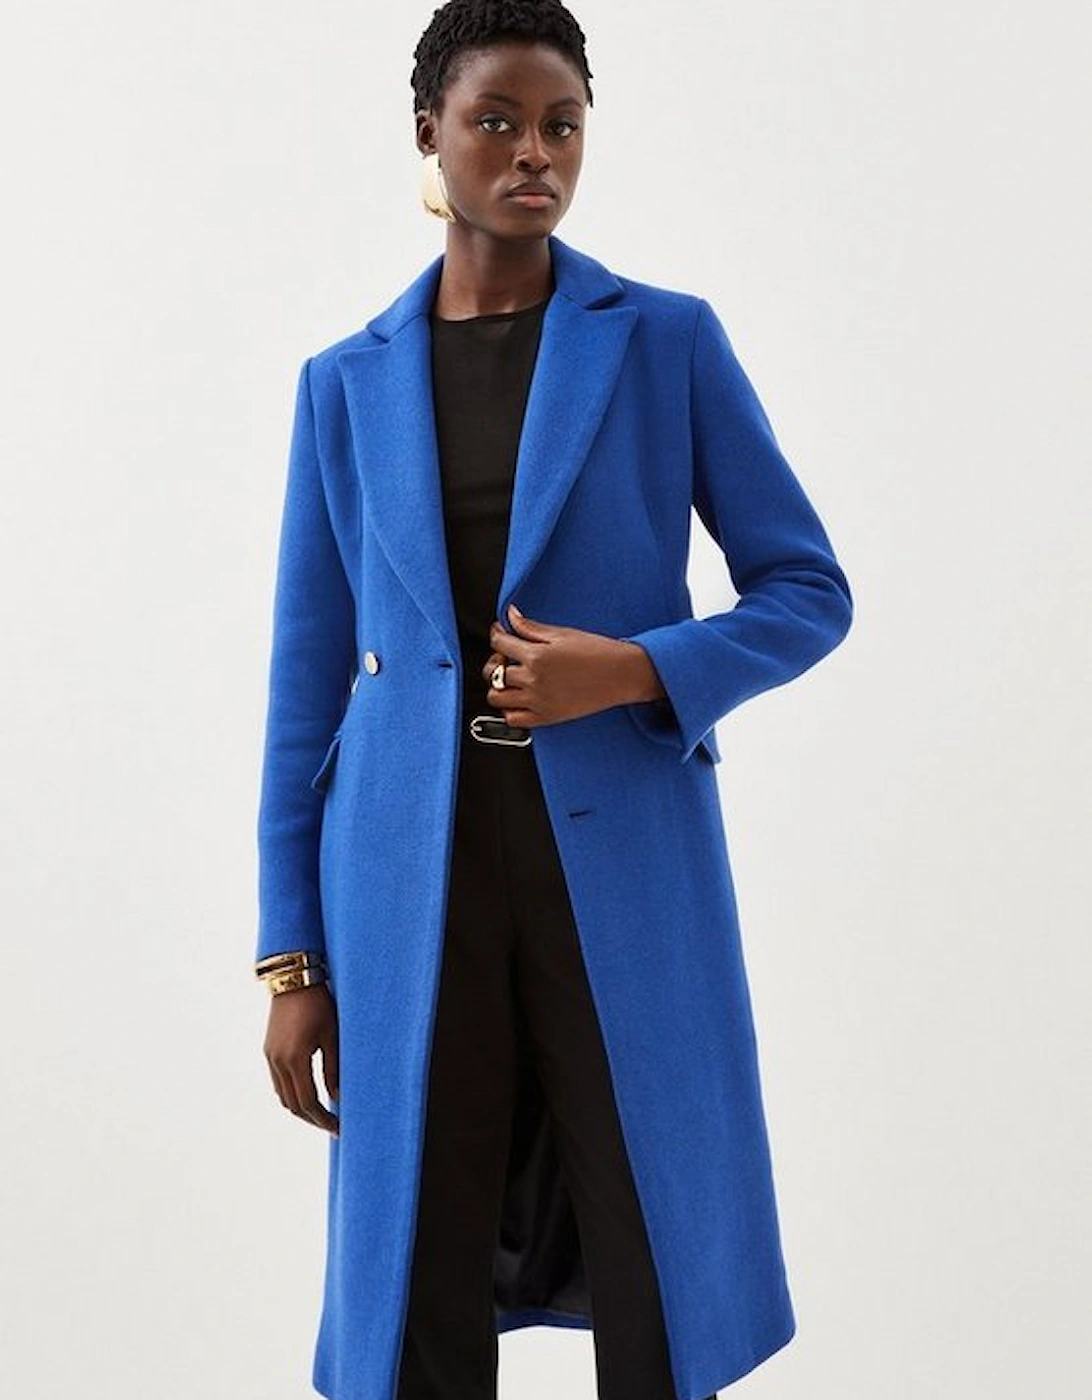 Italian Manteco Wool Mix Button Detail Belted Midi Coat